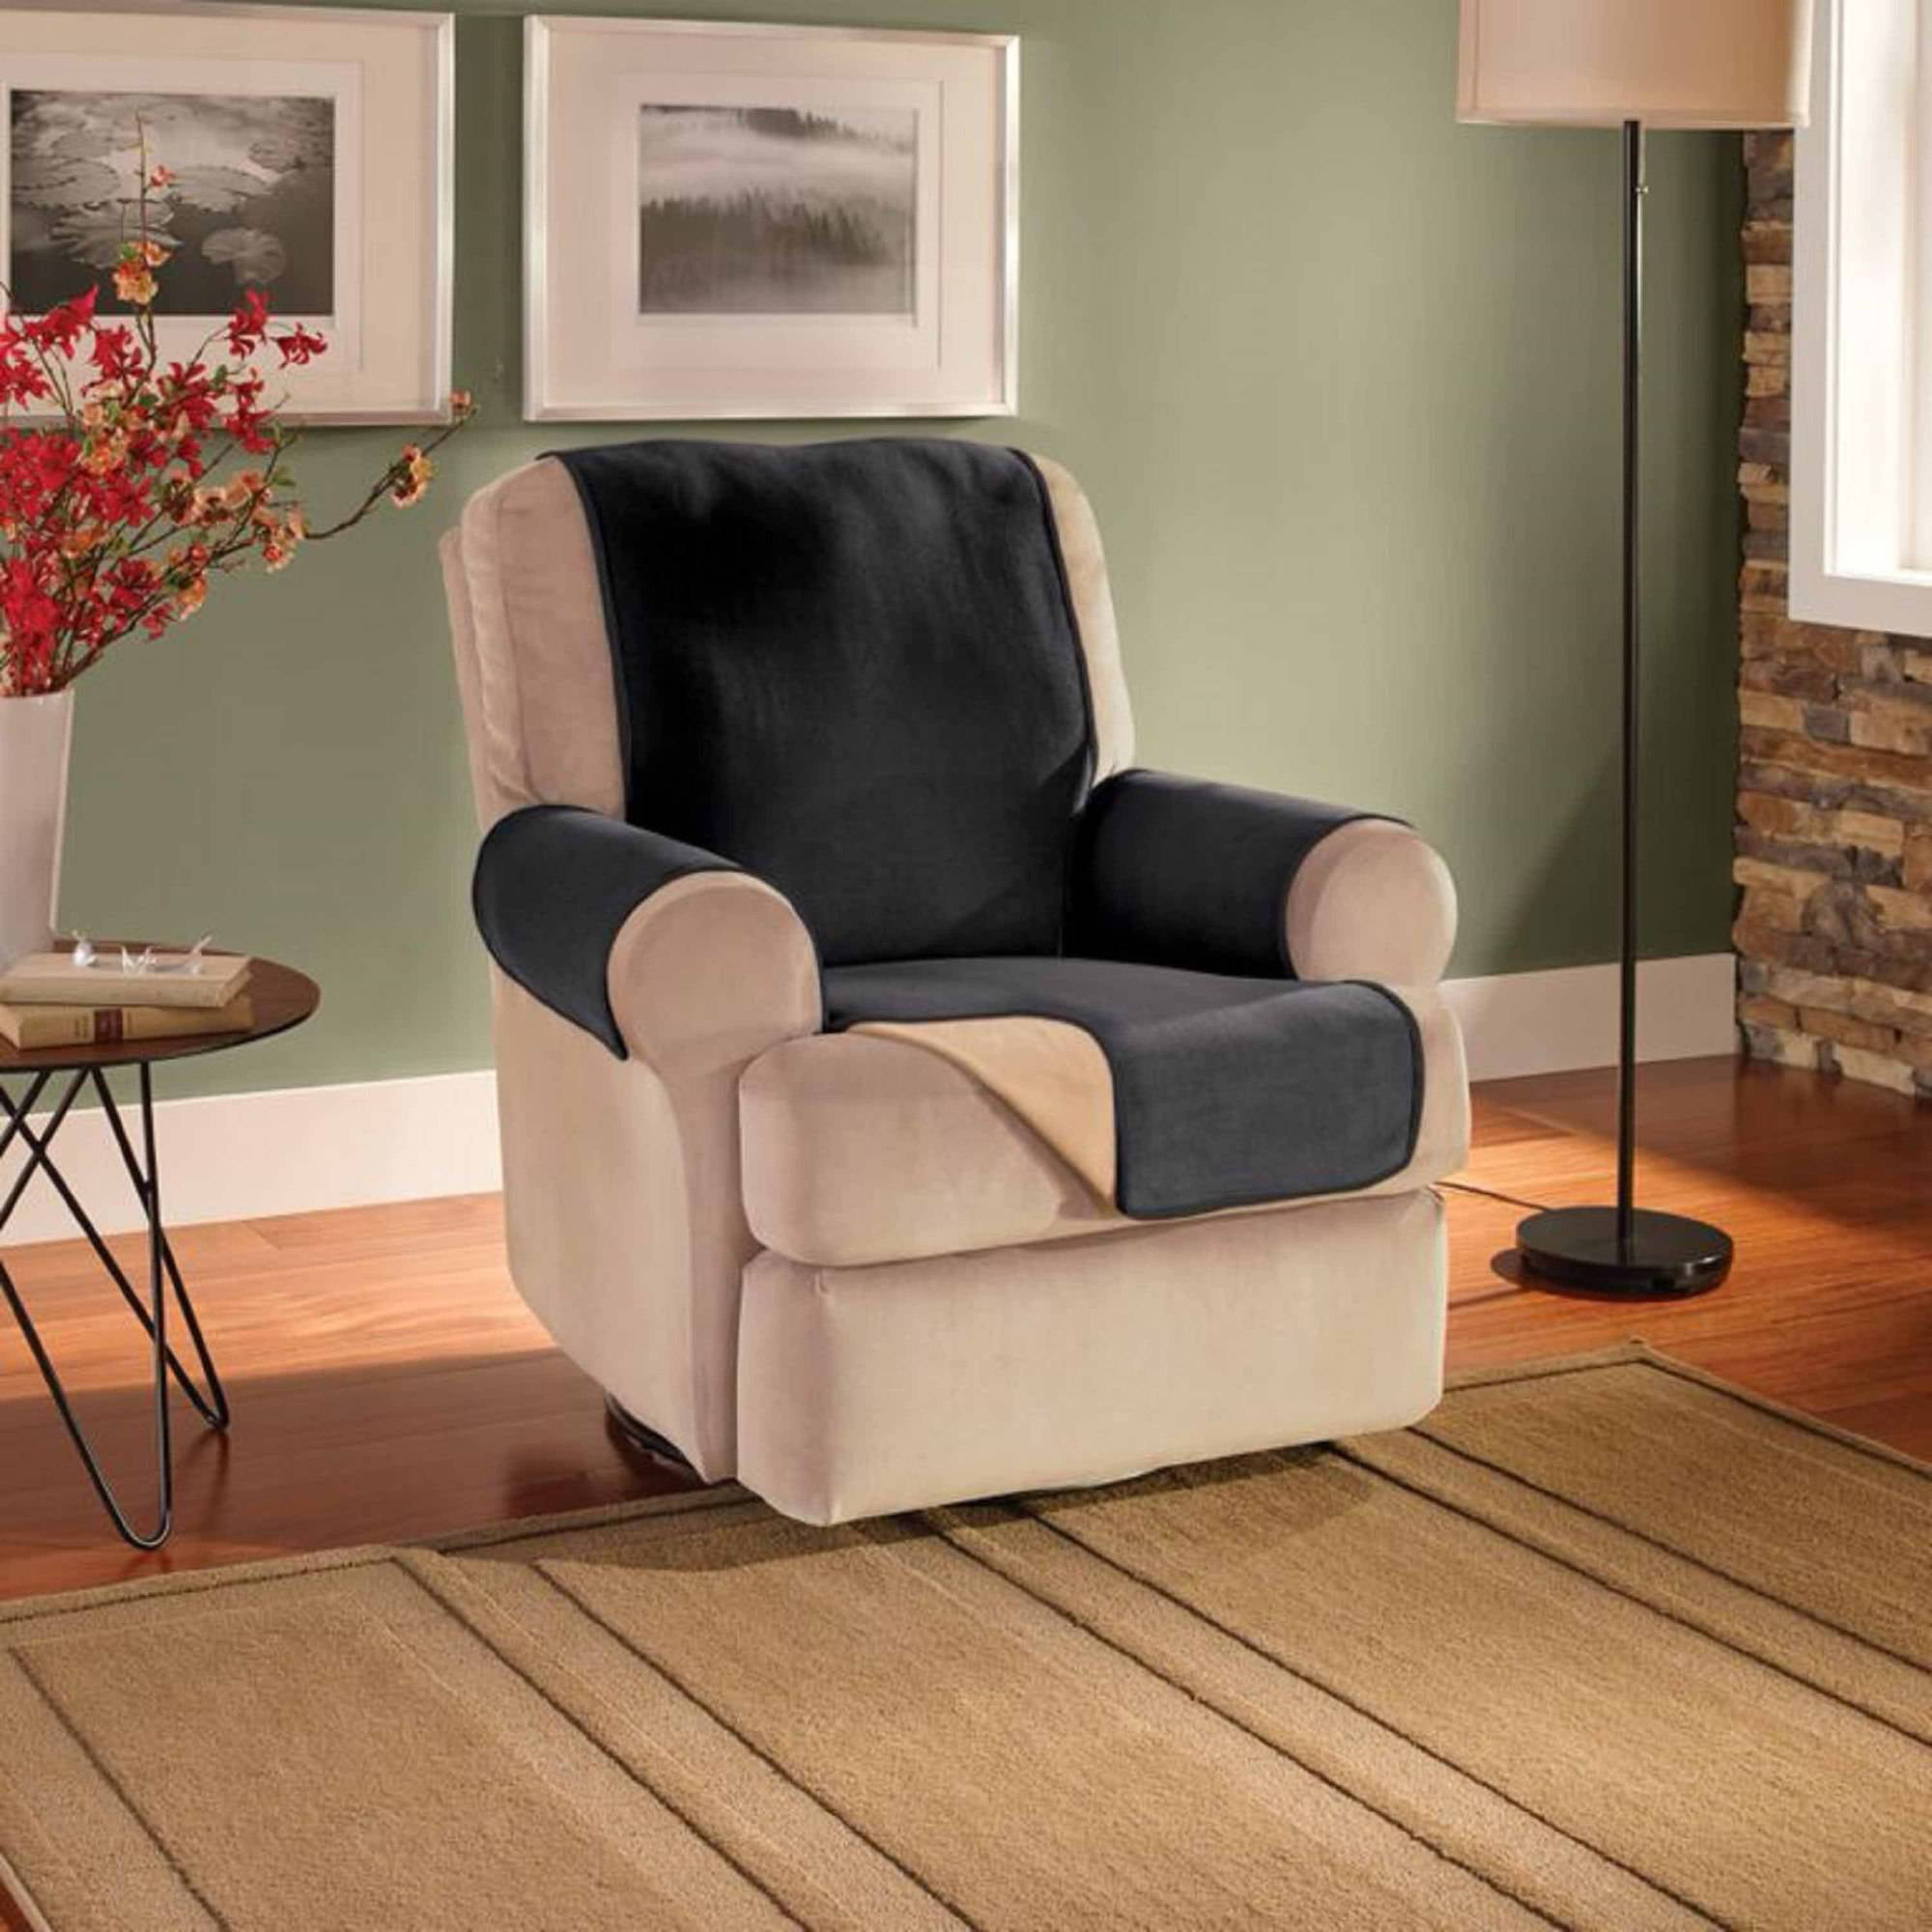 Astounding Living Room Chair Cover you must have